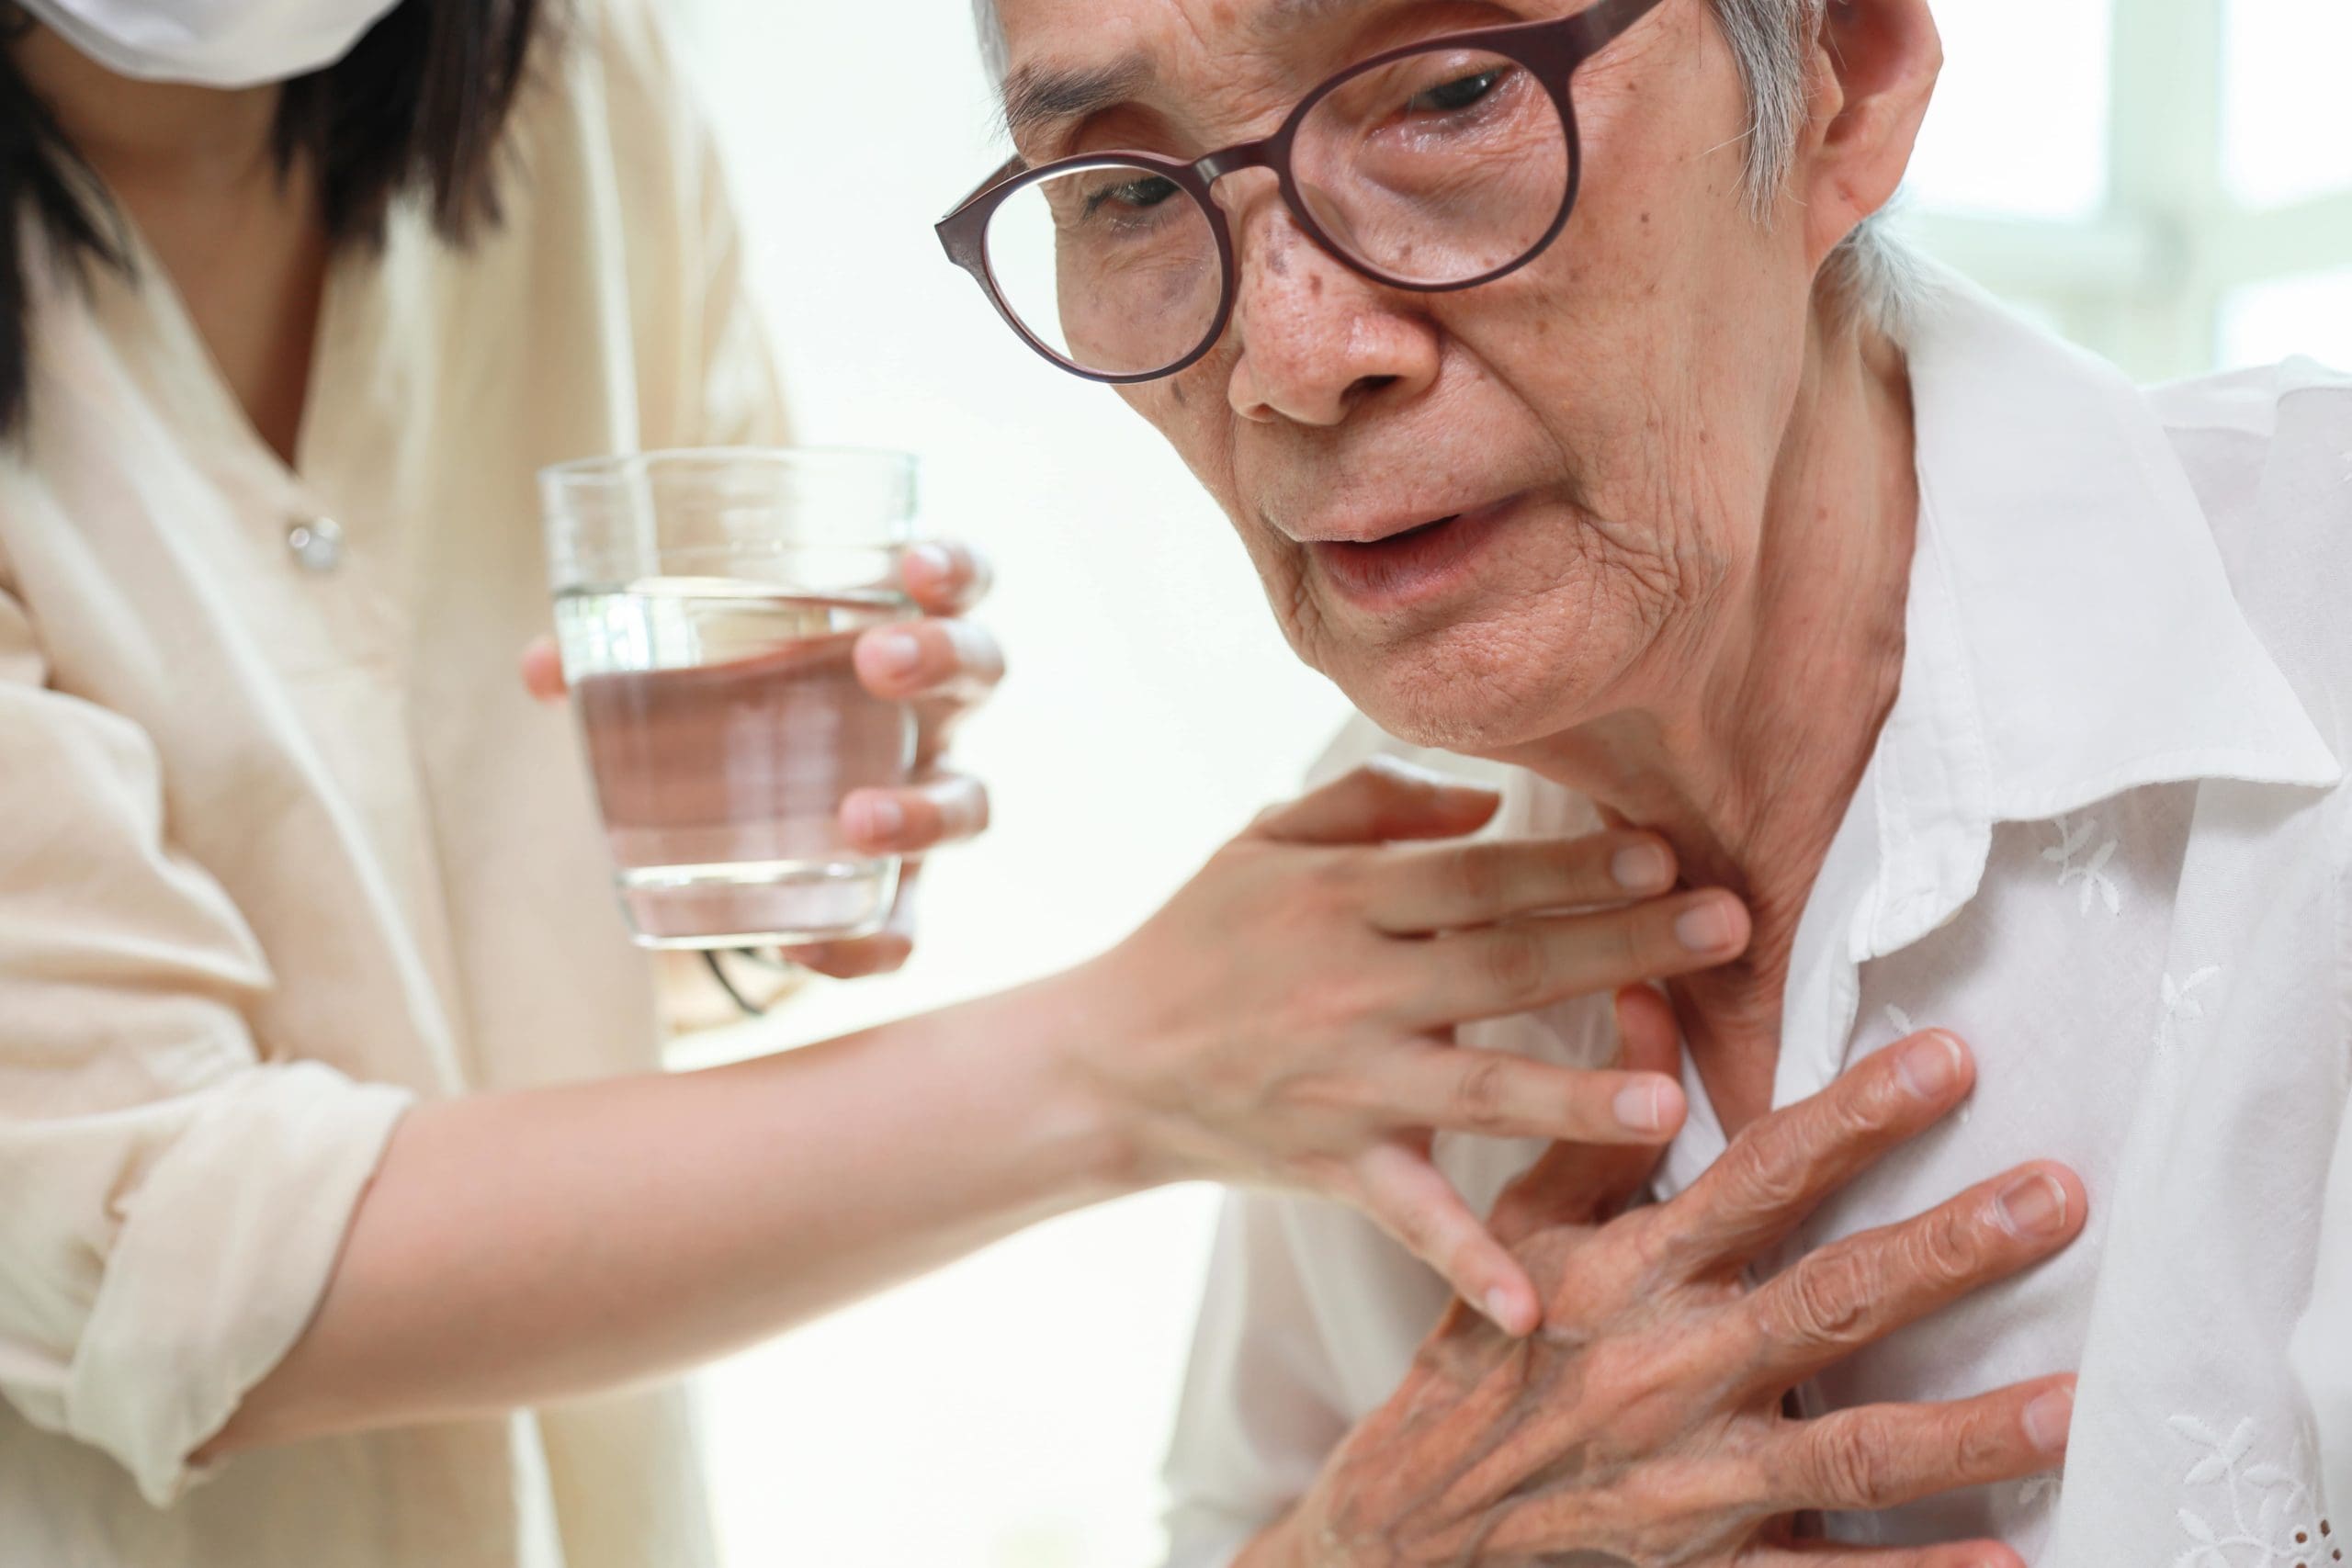 Image of a carer assisting a person with dysphagia